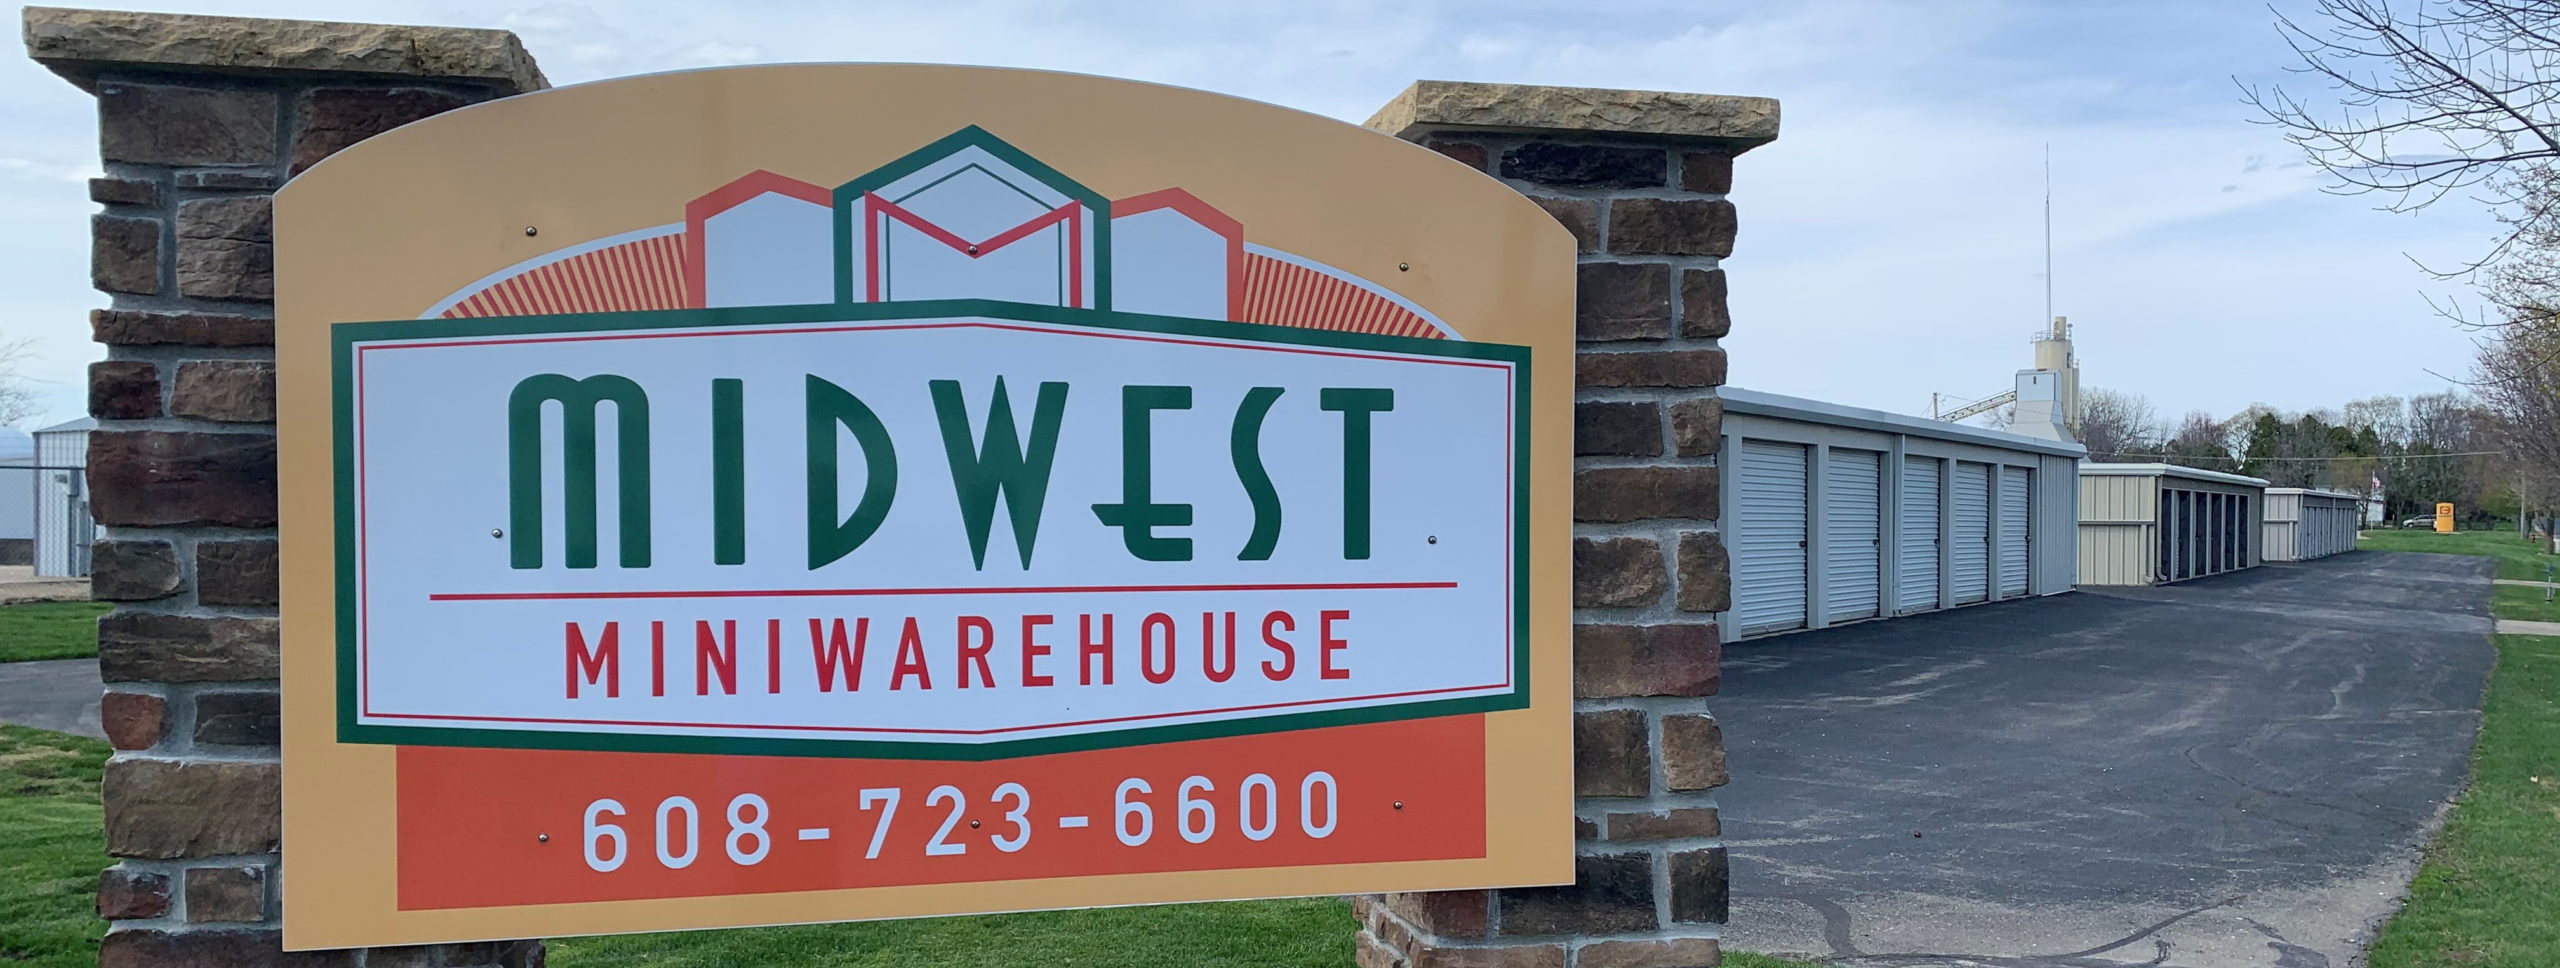 Midwest Miniwarehouse sign